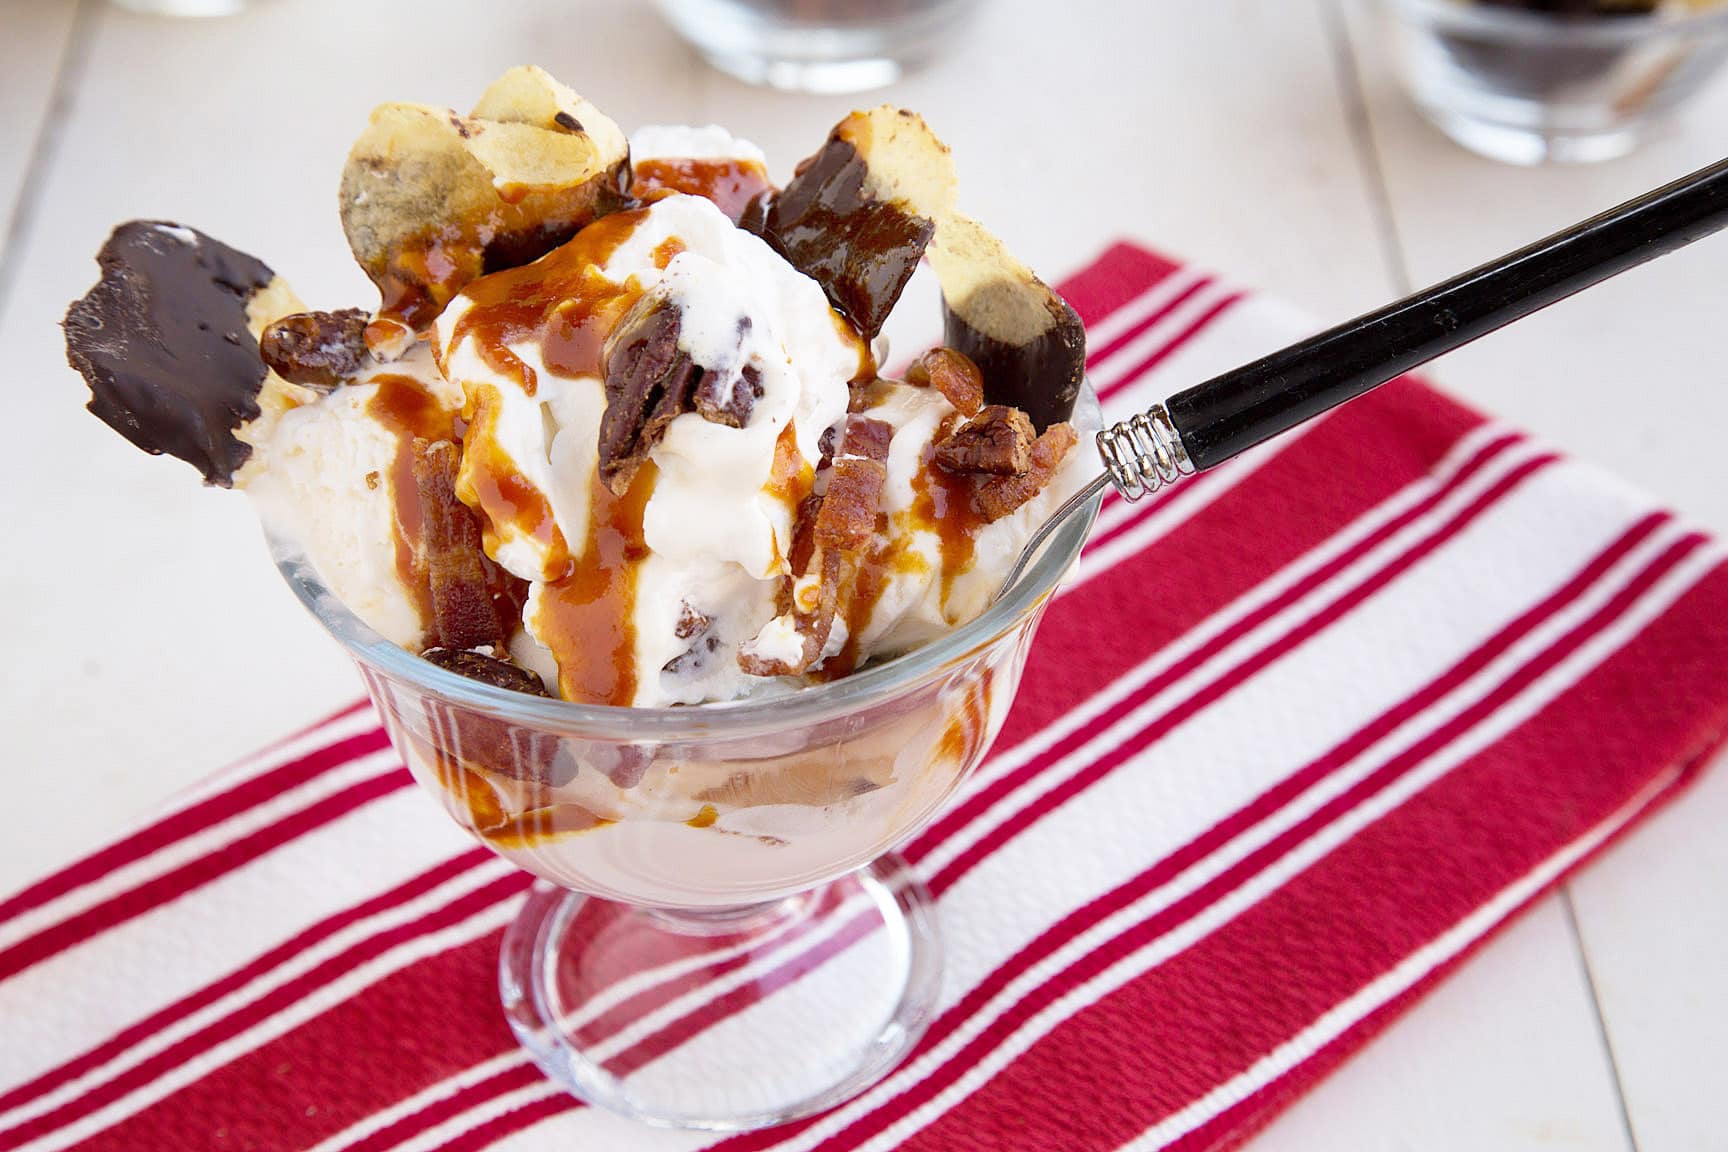 Candied Maple Bacon Sundae with all the trimmings